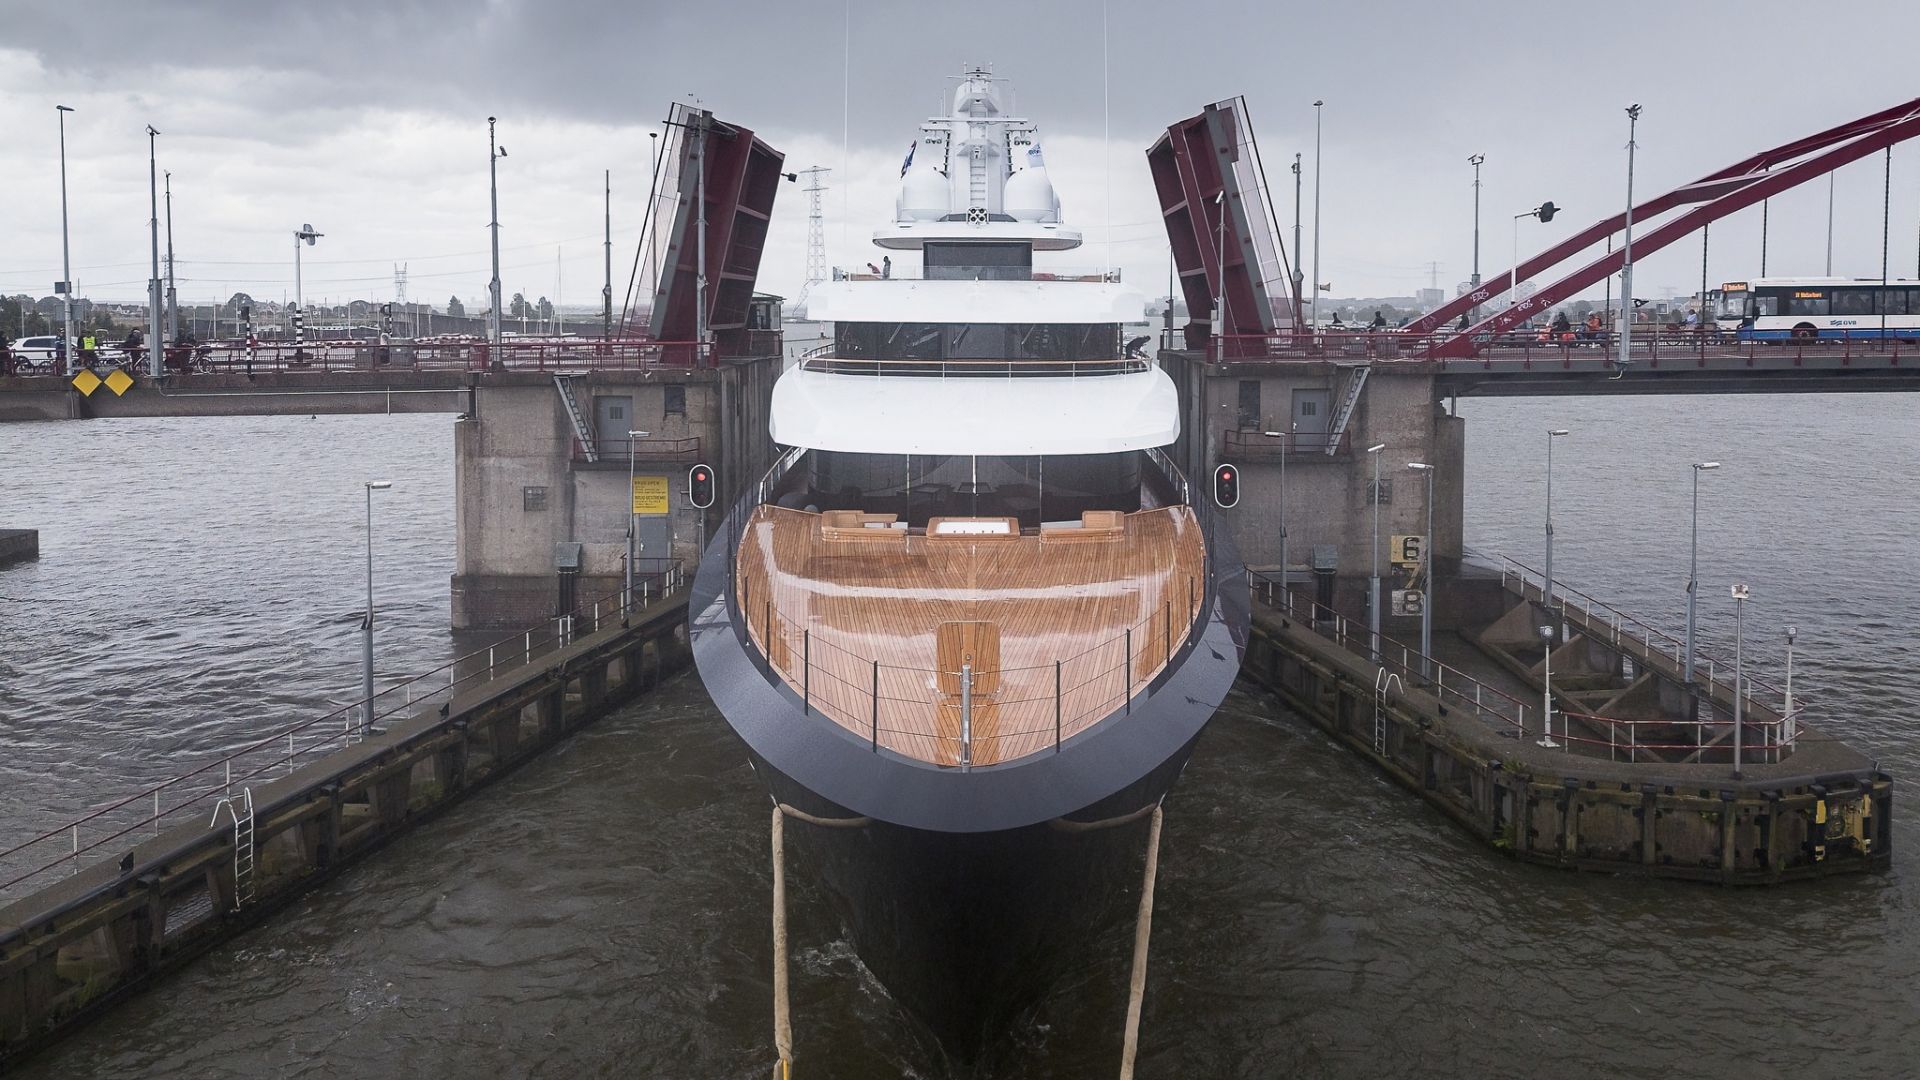 Crafted by Feadship, renowned for its craftsmanship and heritage in yacht building, Drizzle symbolizes the pinnacle of Dutch superyacht excellence. Each detail, from its sleek exterior lines to its lavish interiors, reflects Feadship’s commitment to quality and innovation. As Drizzle prepares for her scheduled delivery in July 2024, anticipation among yachting enthusiasts and industry insiders alike continues to grow. The yacht’s combination of luxury, innovation, and environmental stewardship positions it as a trailblazer in the world of superyachts, setting a new standard for future vessels.